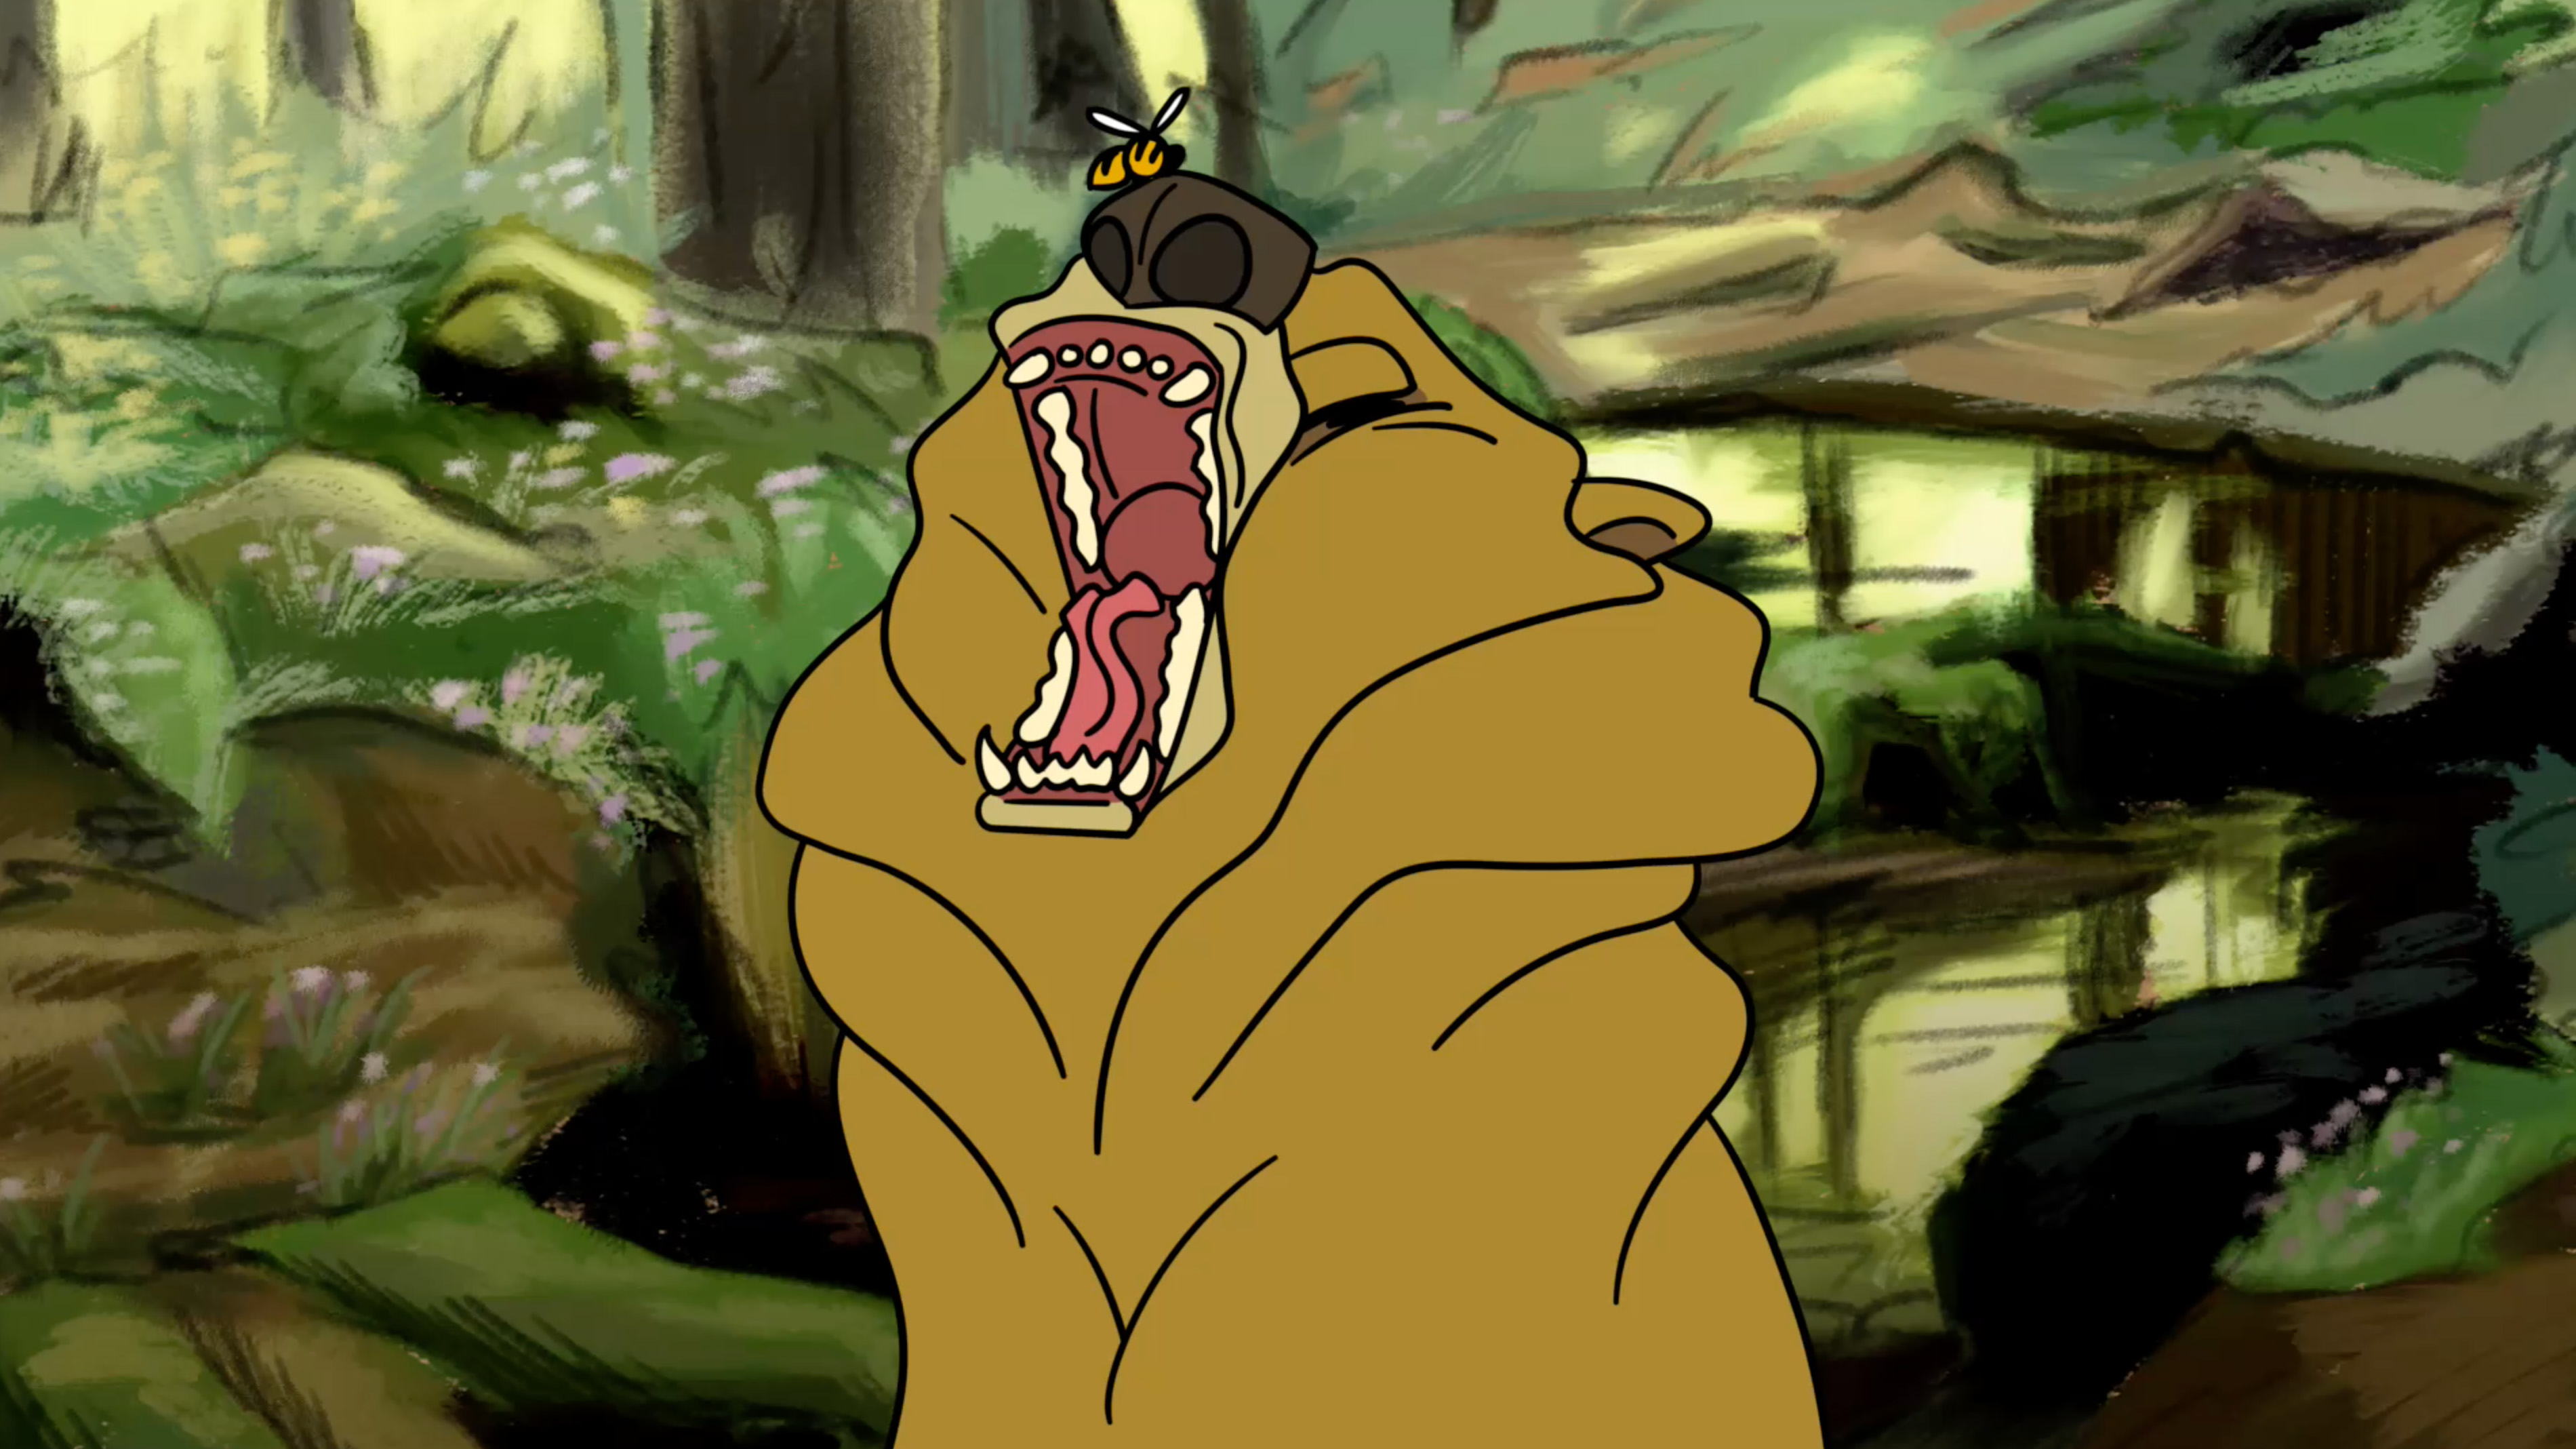  / Still of character Sneezy from "Sneezy the Bear," a 9-second animation created using Photoshop and ToonBoom.